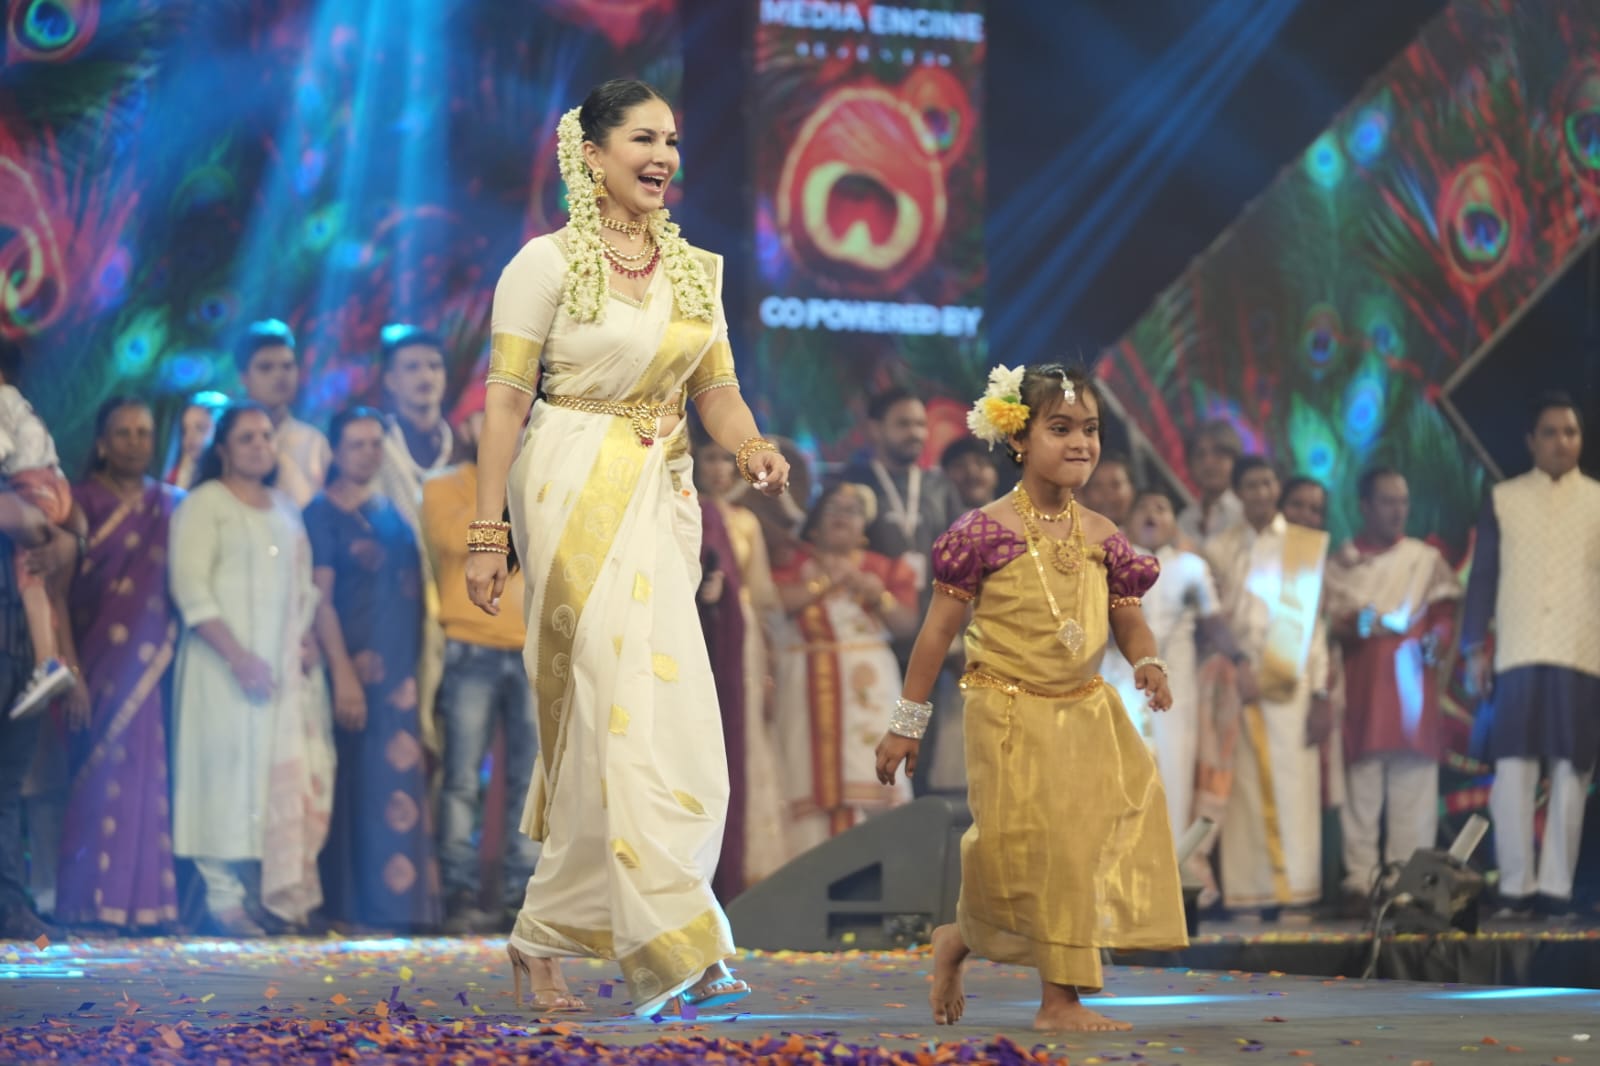 Sunny Leone gives a new dimension to the lives of autistic children